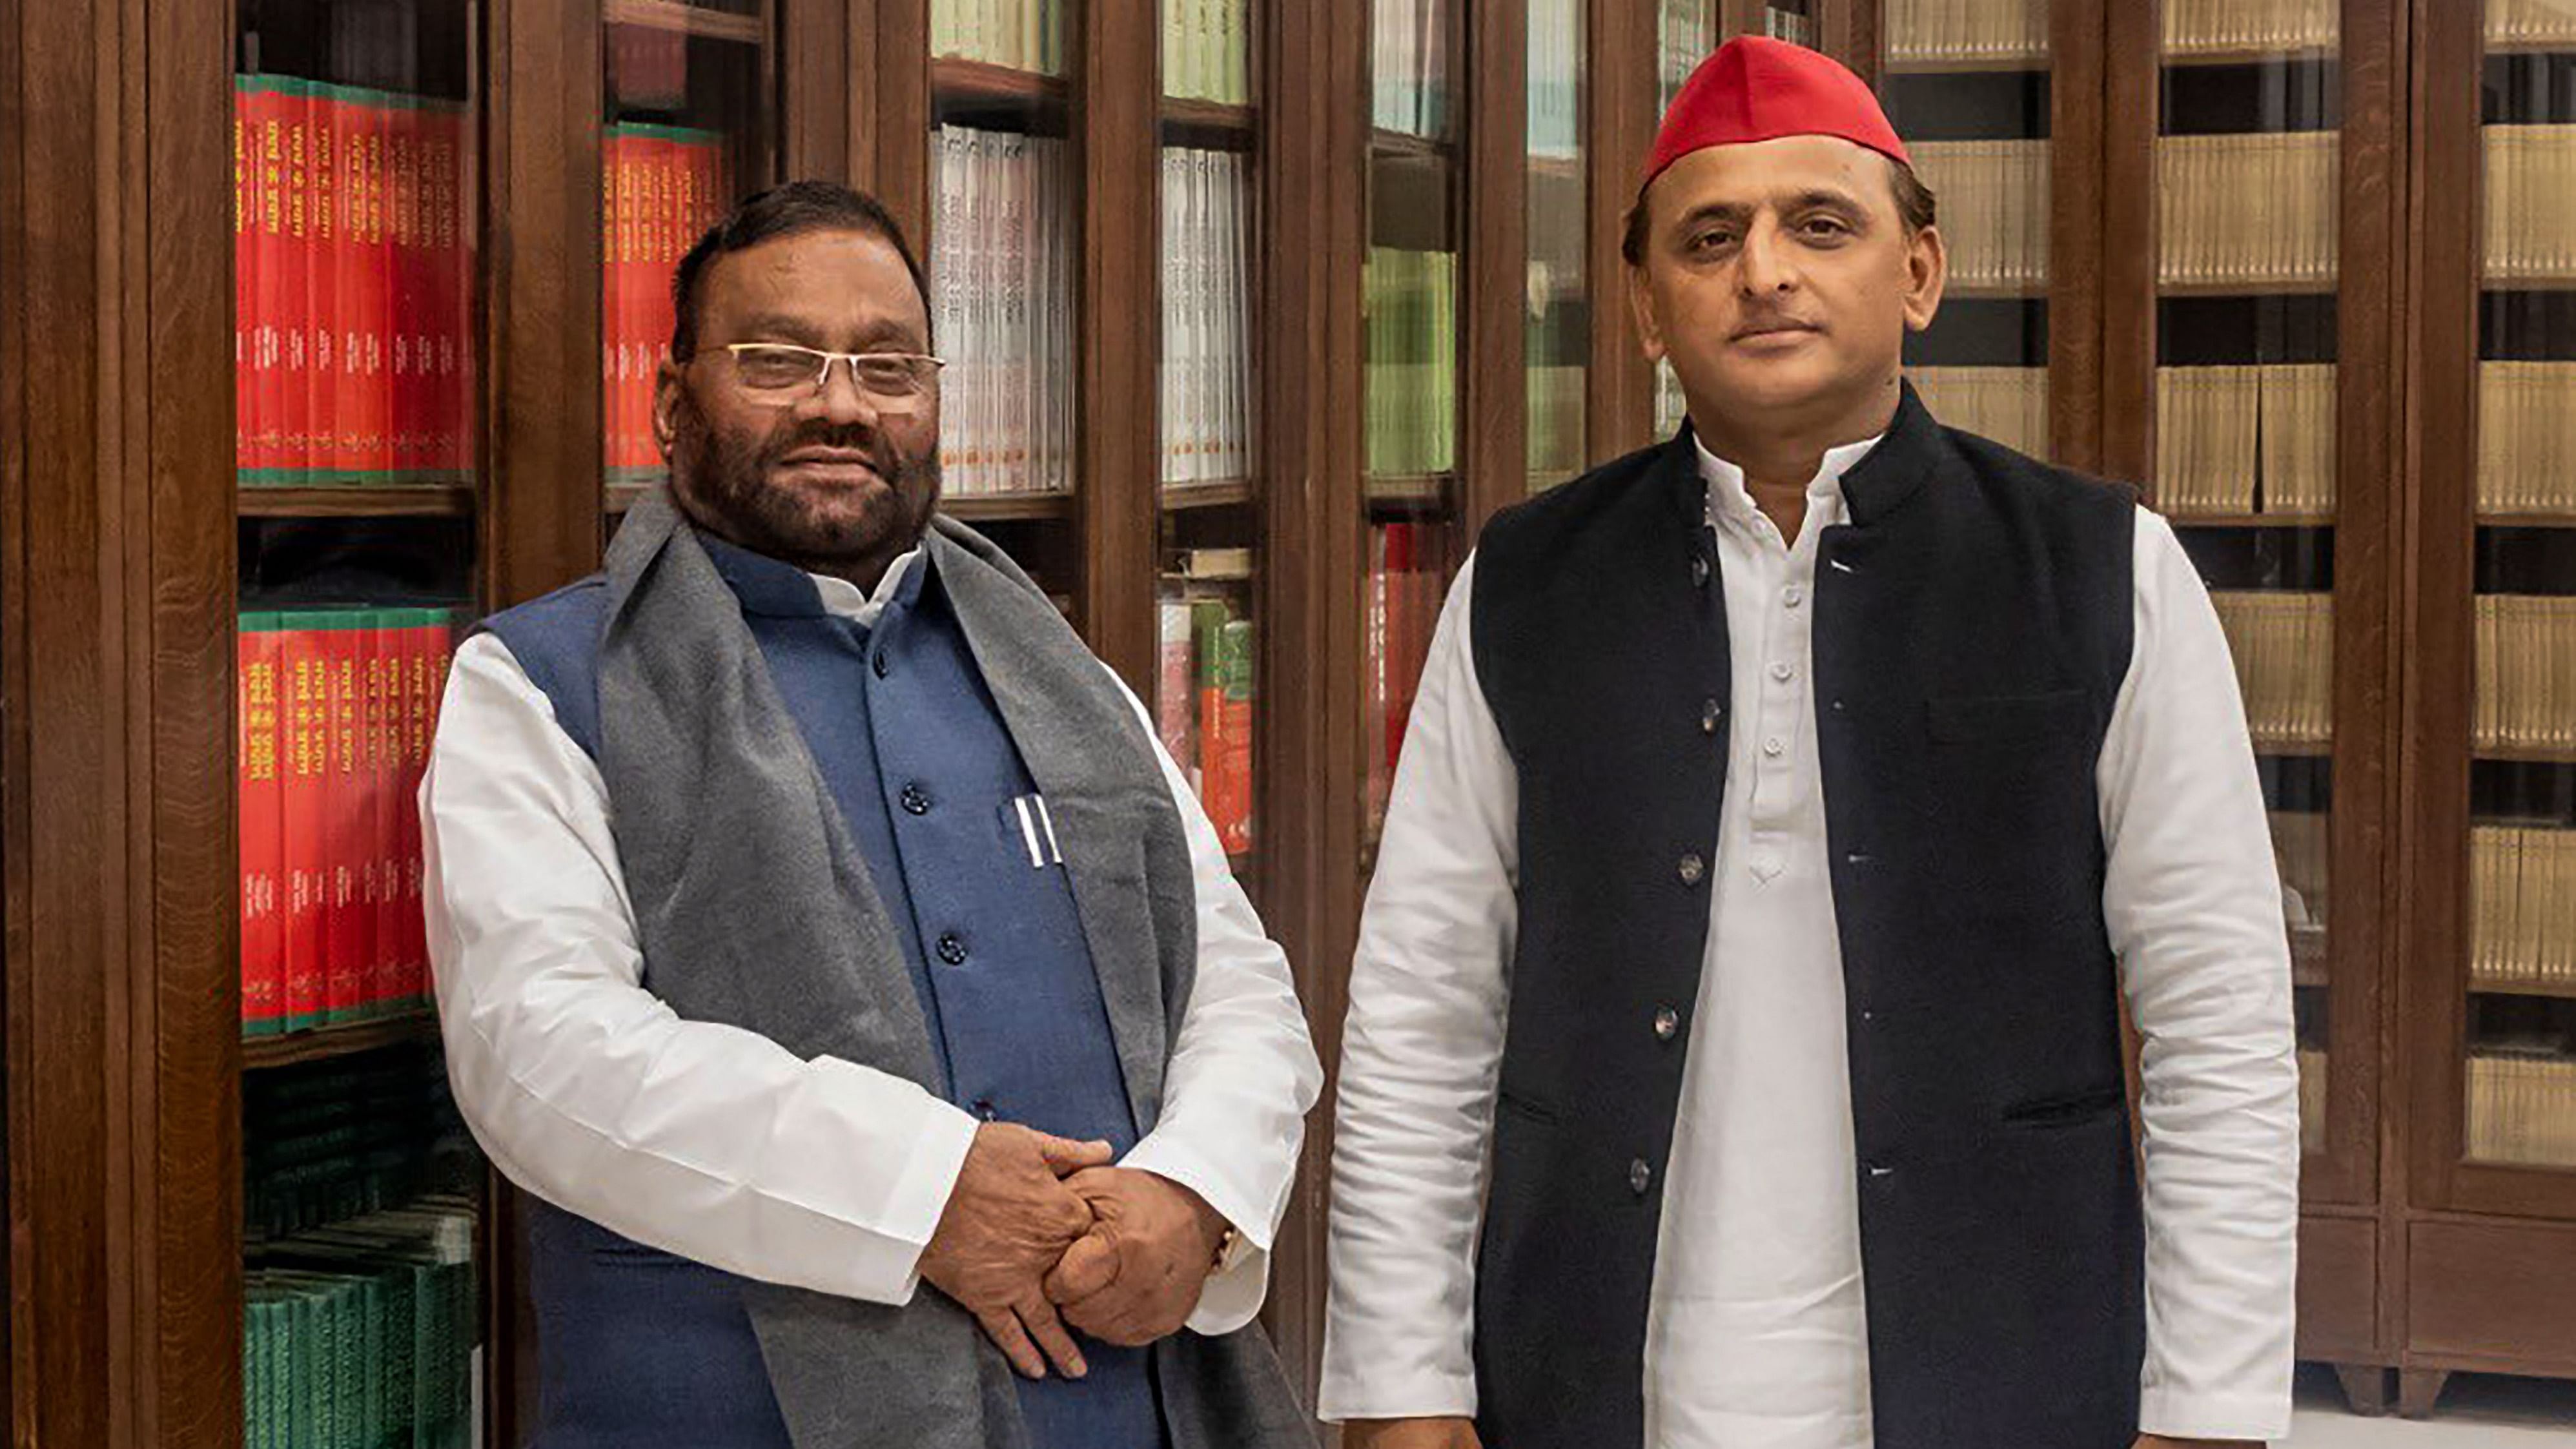 Swami Prasad Maurya, who is considered a prominent OBC leader in Uttar Pradesh, had said certain portions of the Ramcharitmanas "insult" a large section of society on the basis of caste and demanded that these be "banned". Credit: PTI Photo